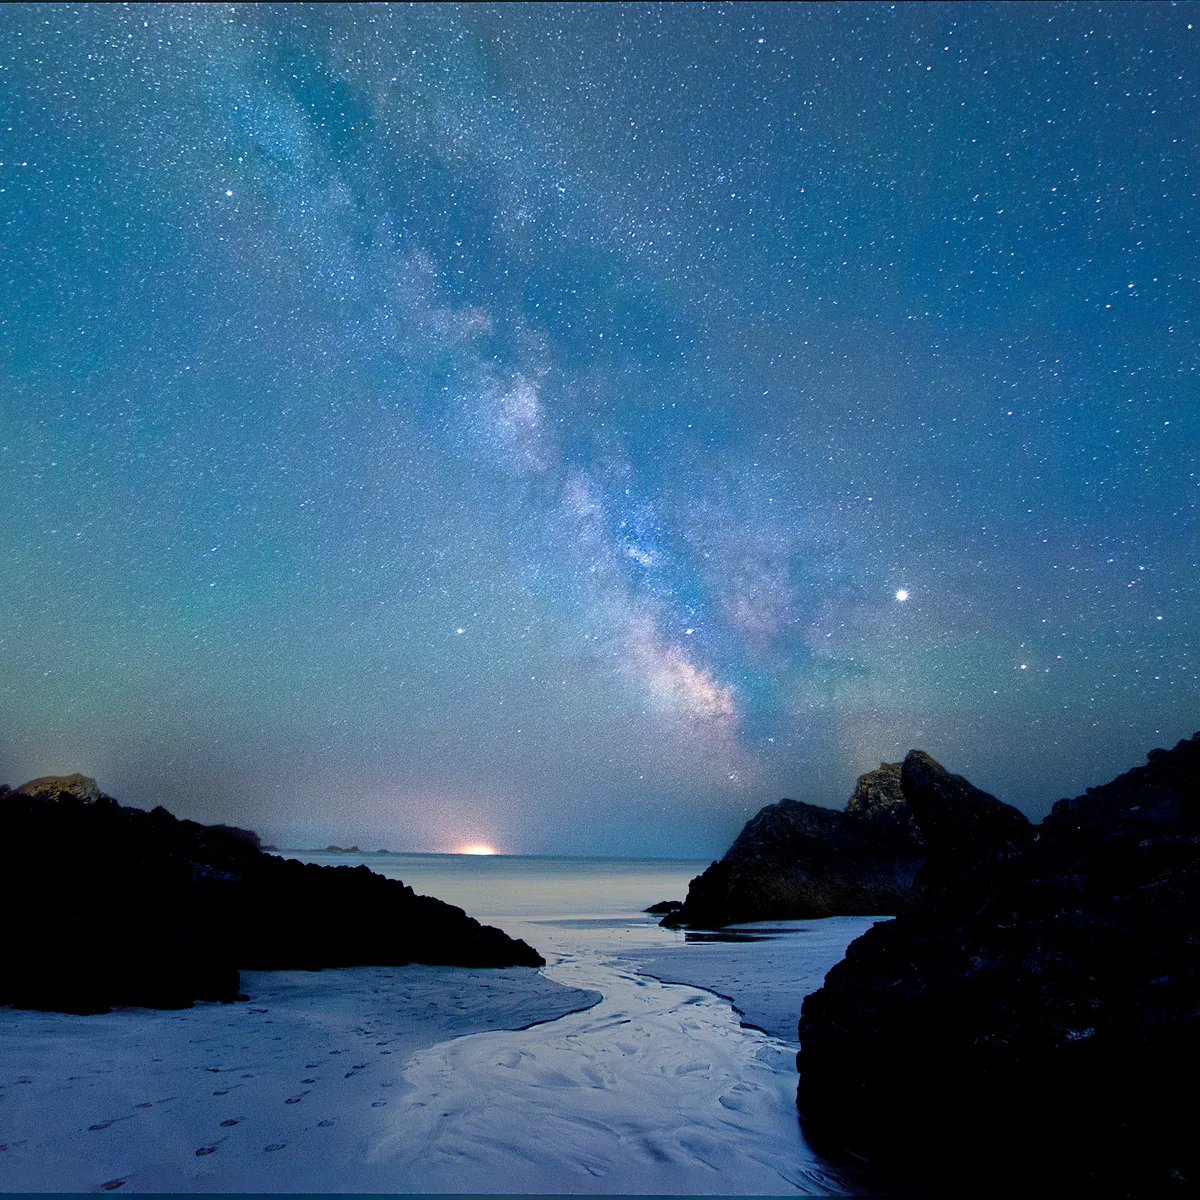 Kynance Cove under the Milky Way Louise Jones (UK). Category: The Sir Patrick Moore Prize for Best Newcomer. Equipment Nikon D7100 camera, Sigma 10-20 mm lens at 10 mm f/3.5, ISO 3200, 5 x 25-second exposures.